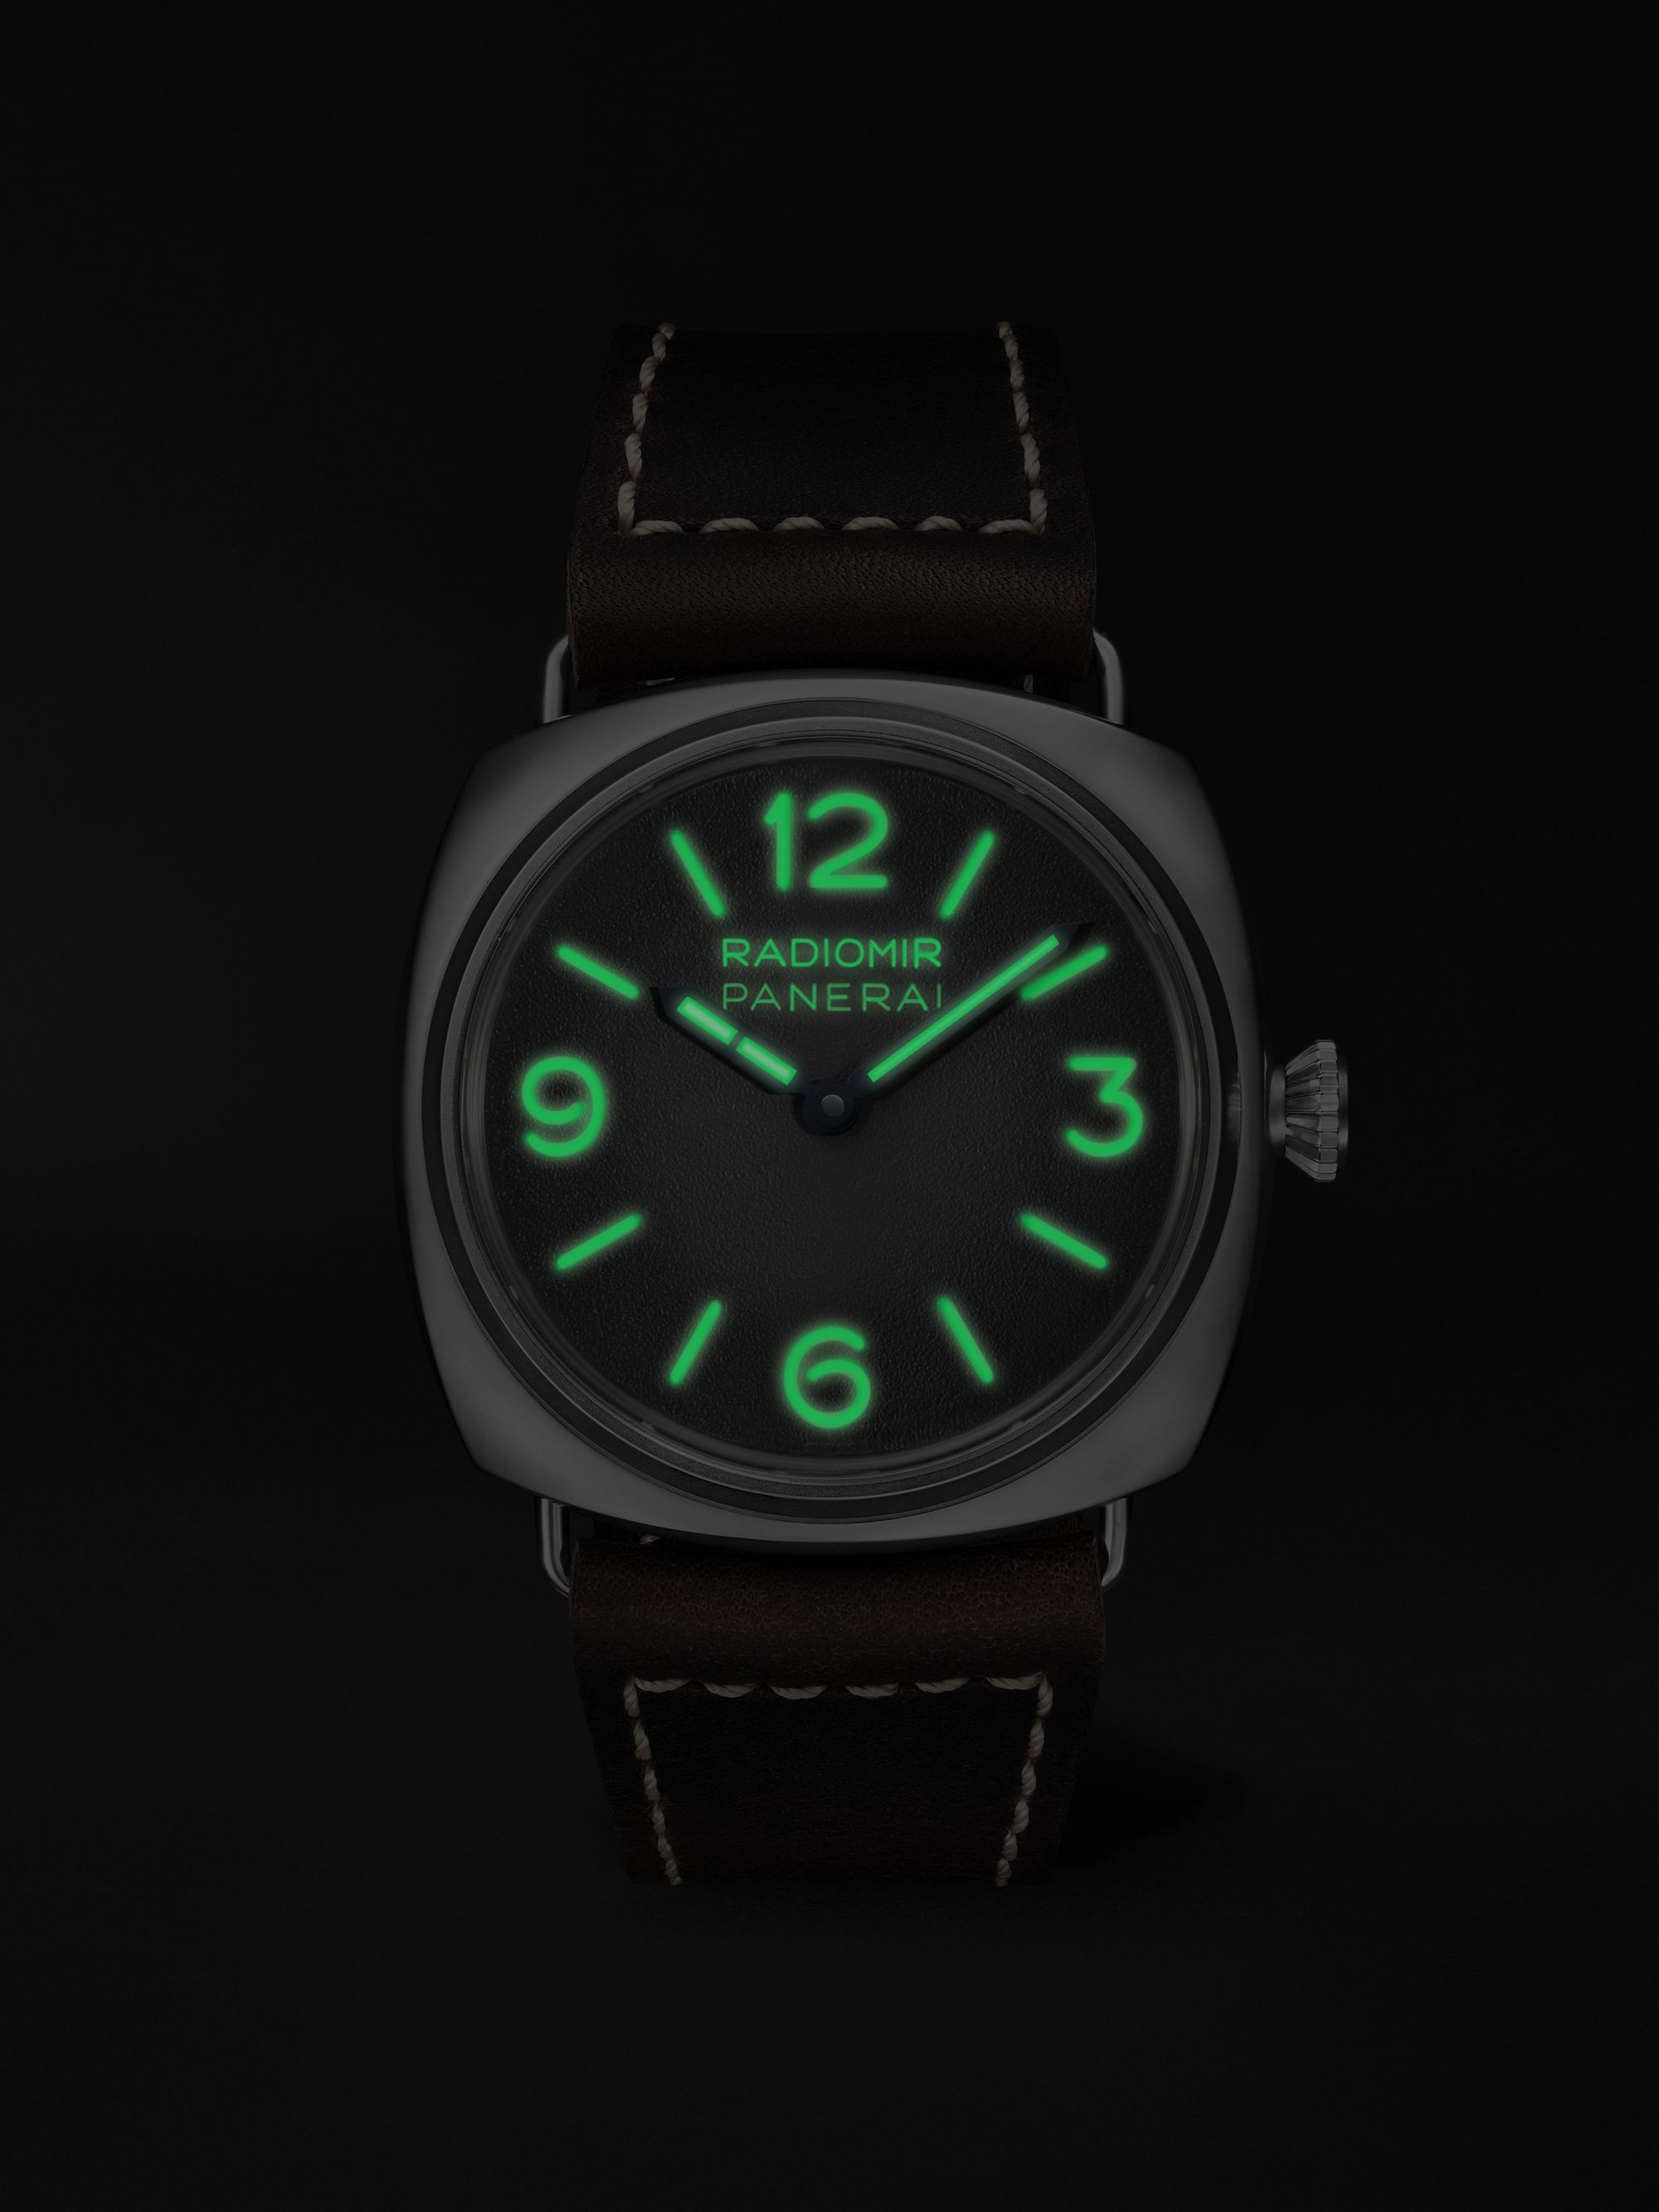 PANERAI Radiomir Origine Automatic 45mm Stainless Steel and Leather Watch, Ref. No. PAM01335